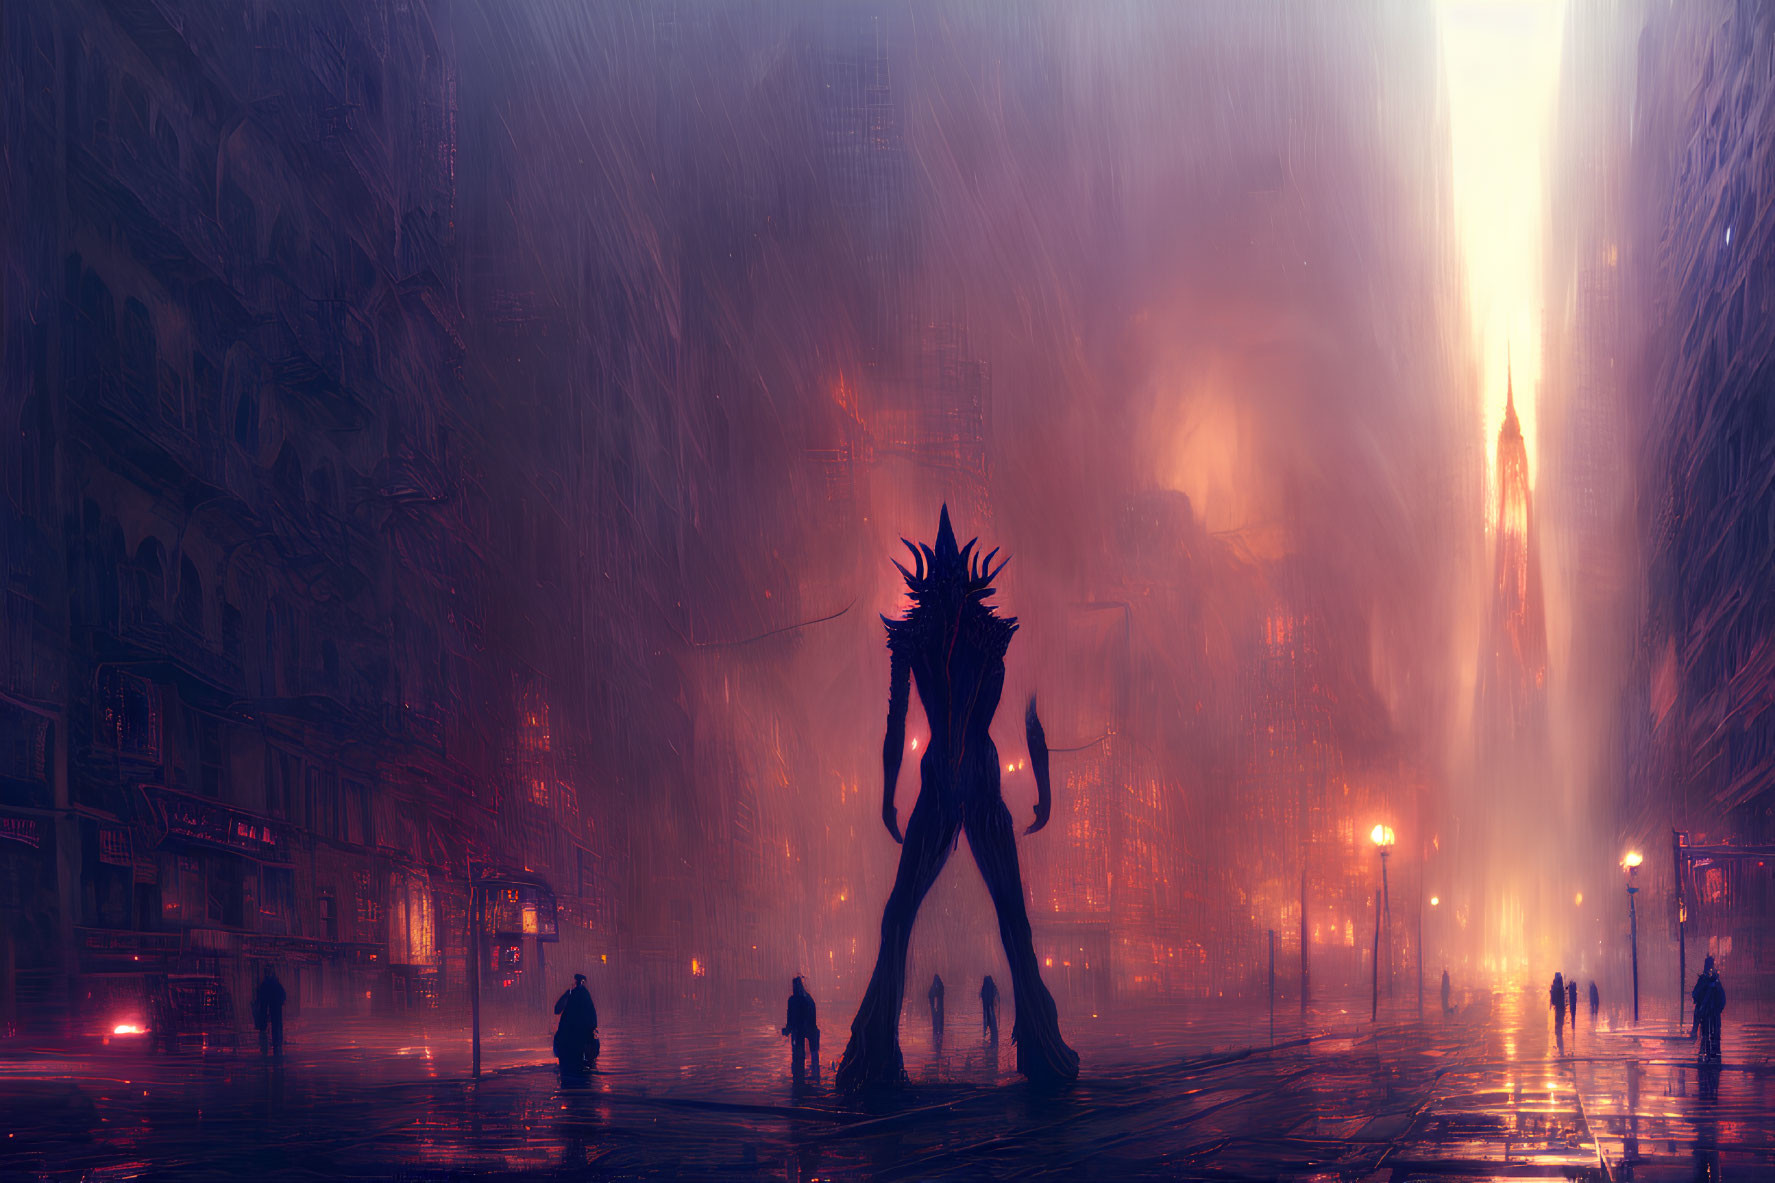 Silhouette with Spiky Hair in Rainy Cyberpunk Cityscape